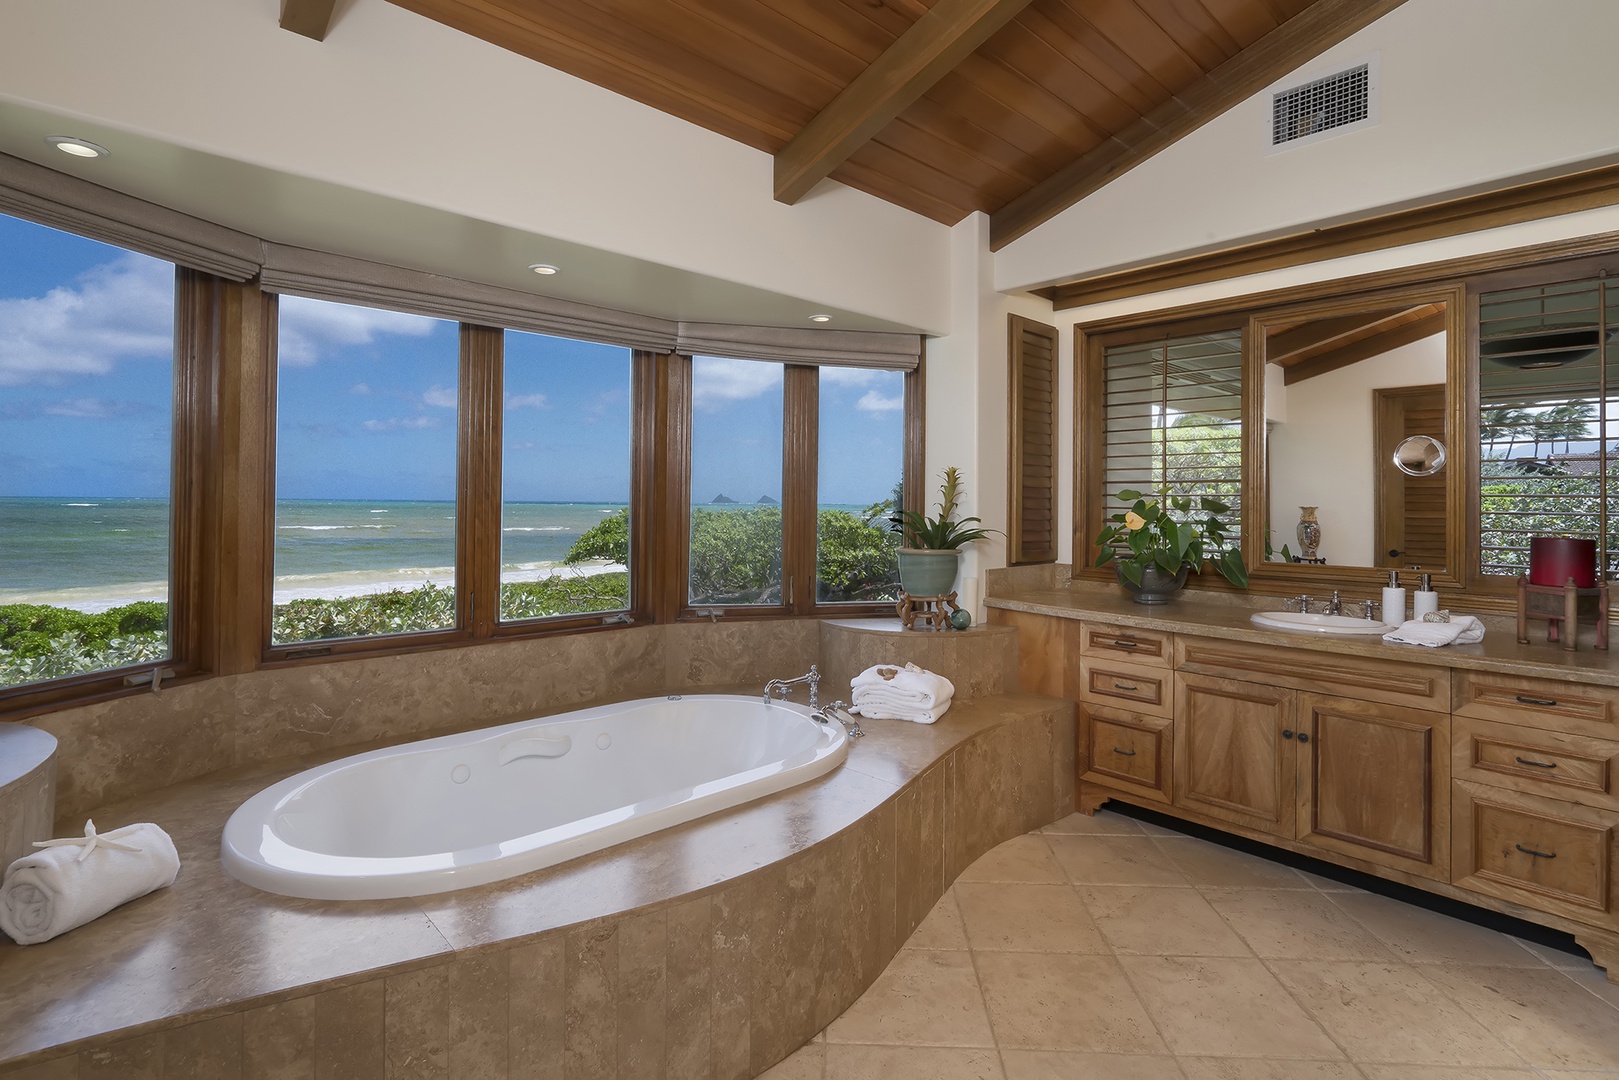 Kailua Vacation Rentals, Kailua's Kai Moena Estate - Main house: Primary Bathroom with jetted tub and has walk in shower.